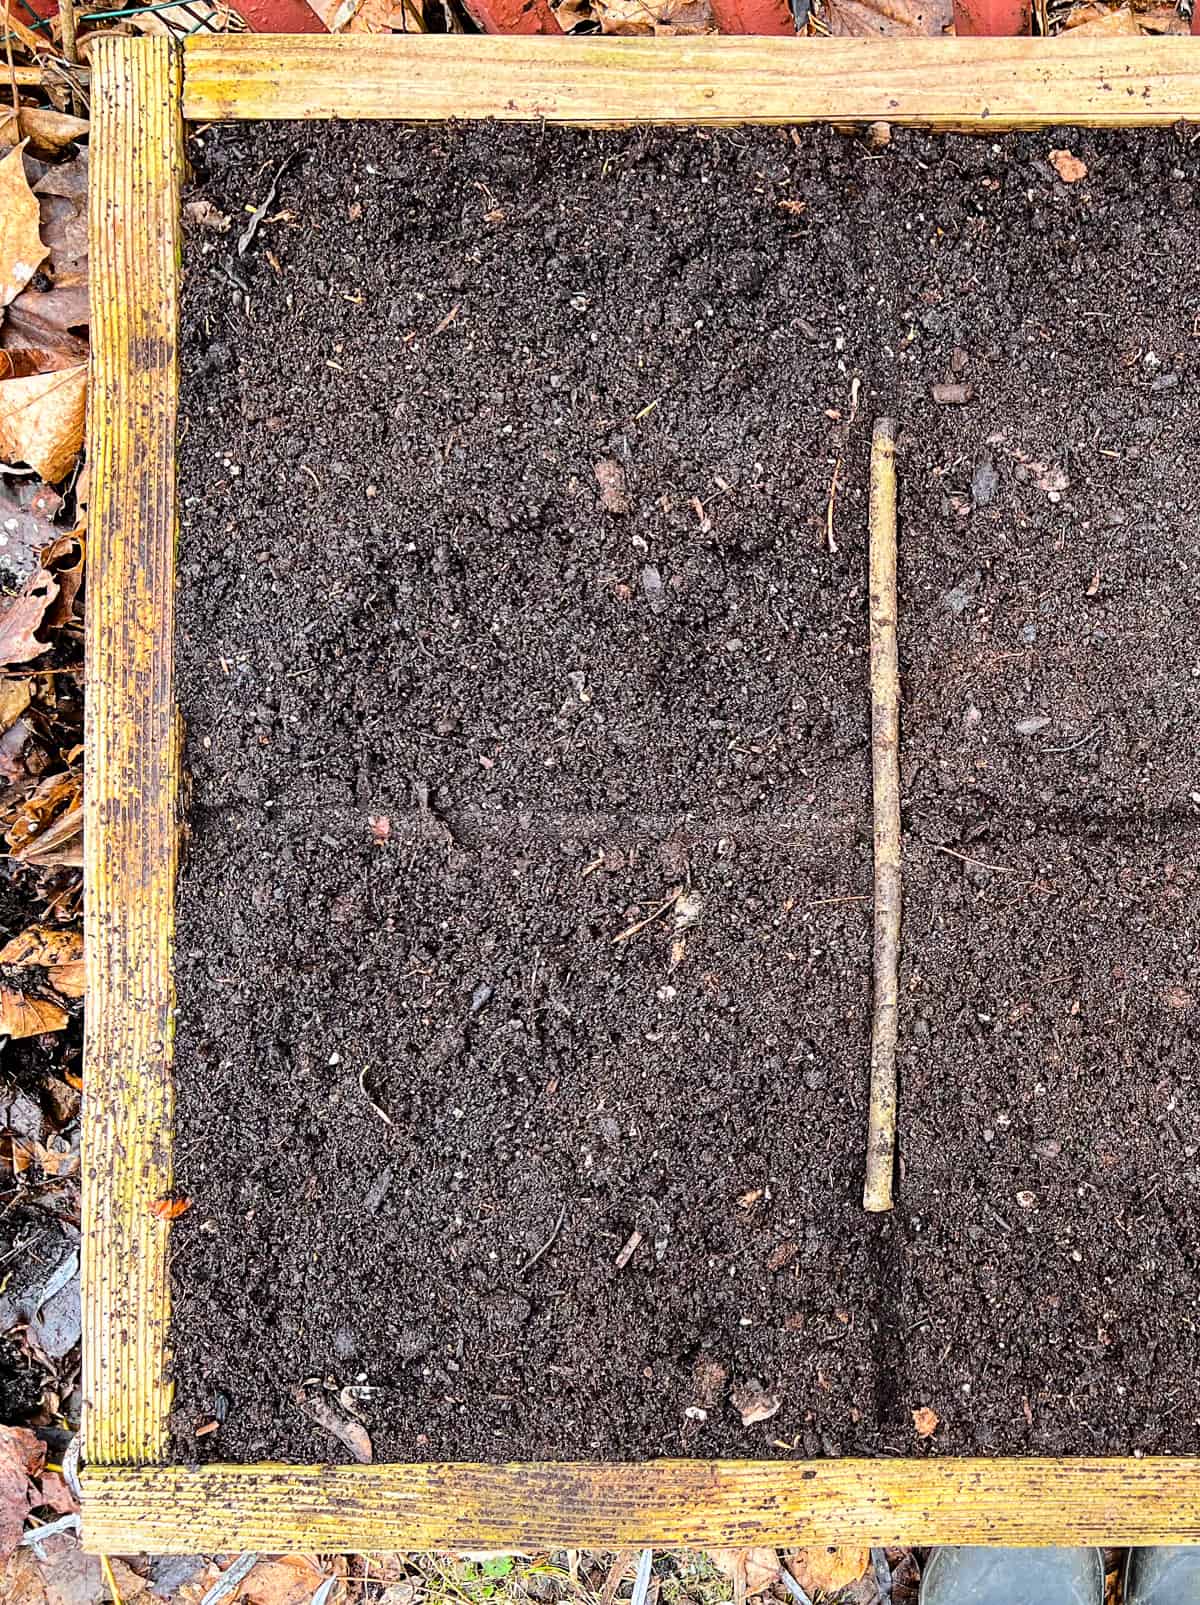 An image of a stick being used to divide square foot plots in a raised bed.